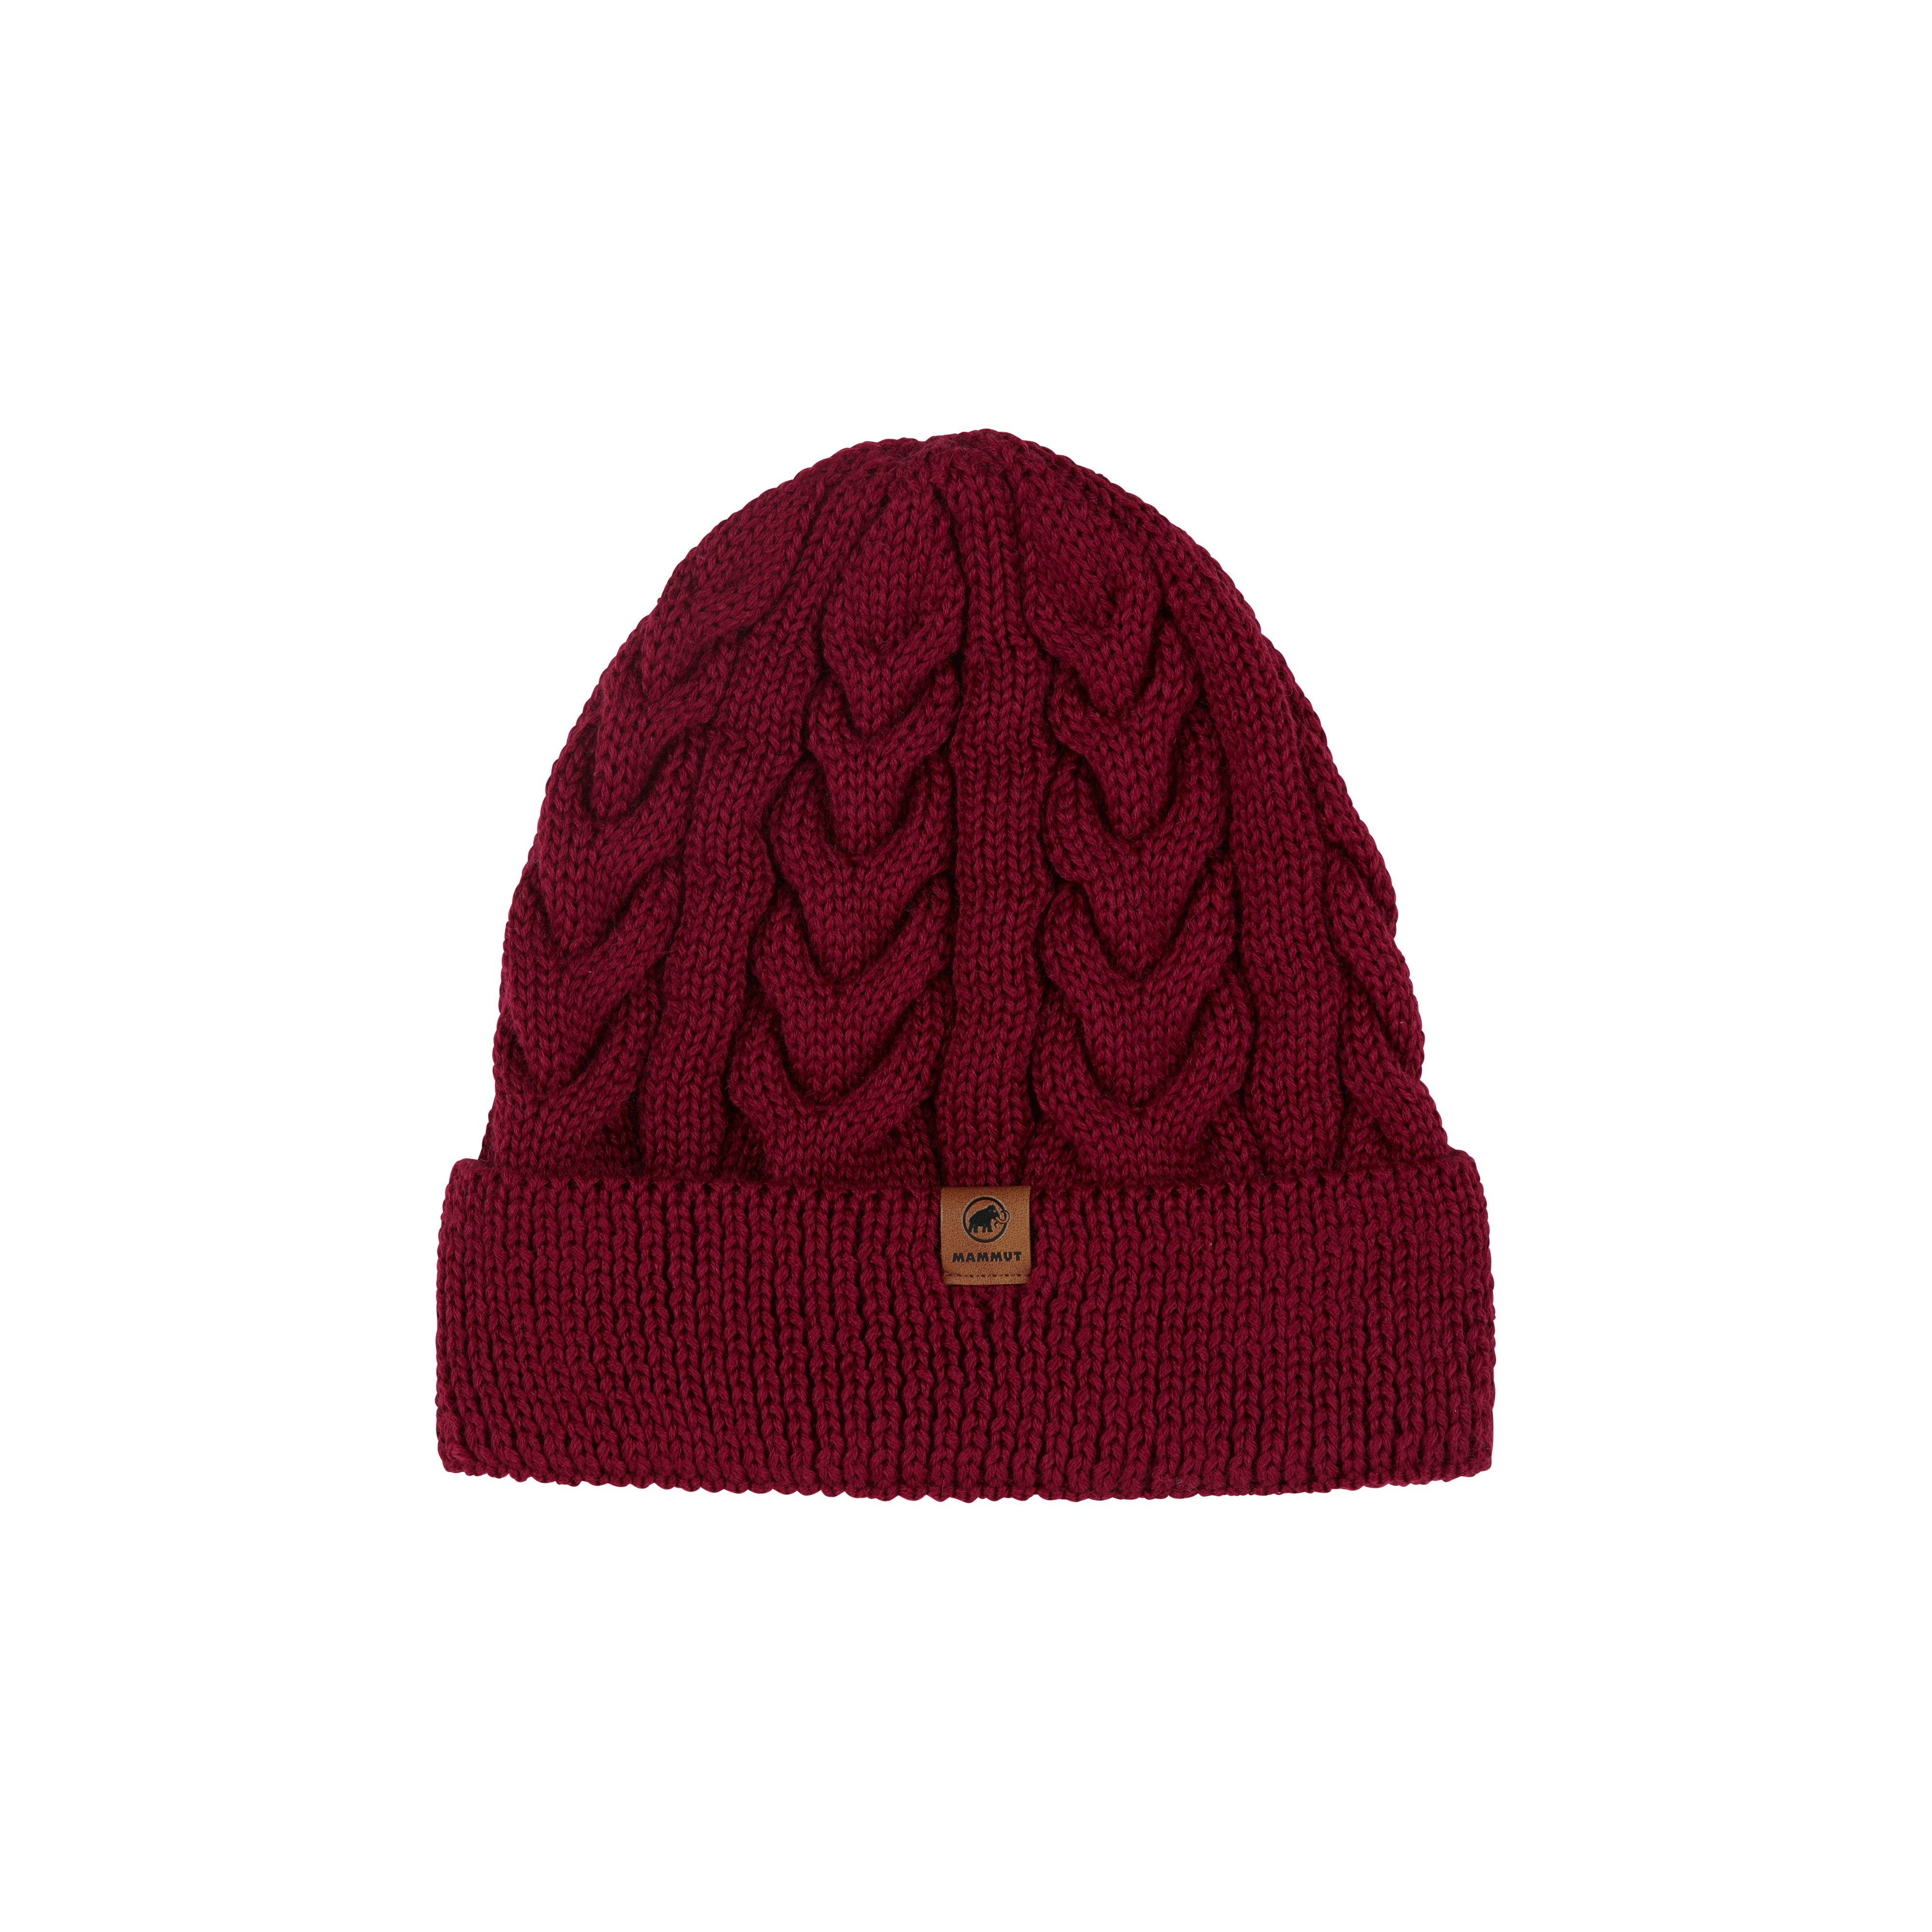 Valbella Beanie - blood red, one size product image